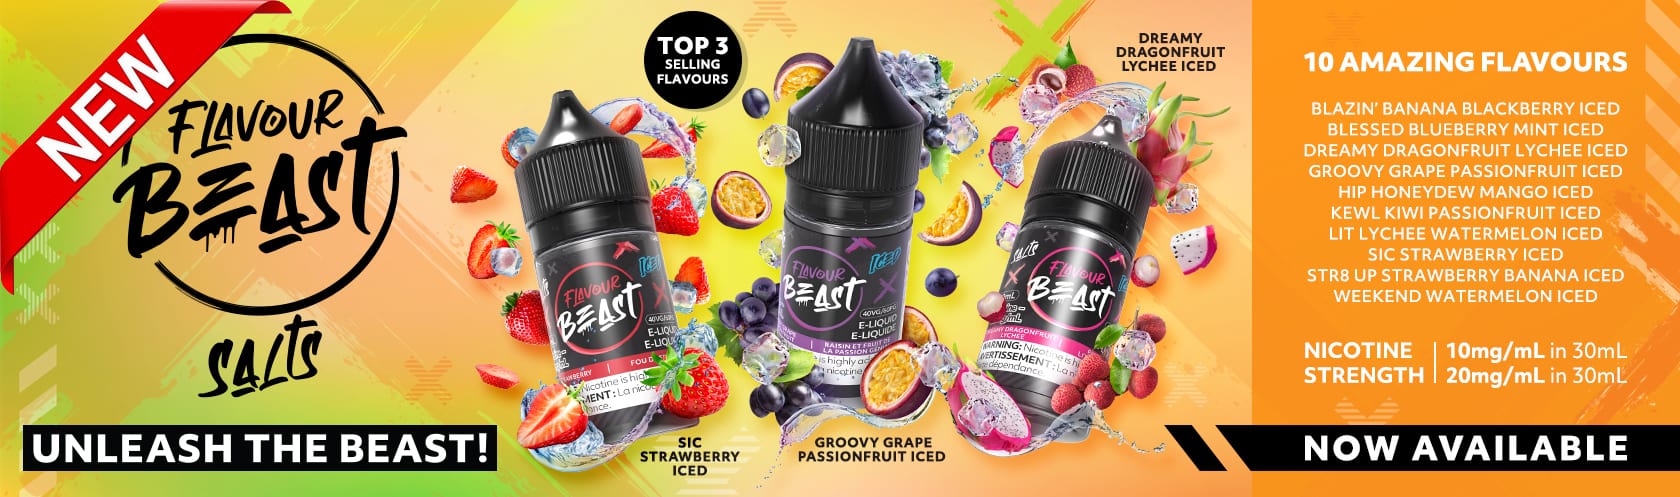 NEW: 10 more flavors for the Flavour Beast lineup!